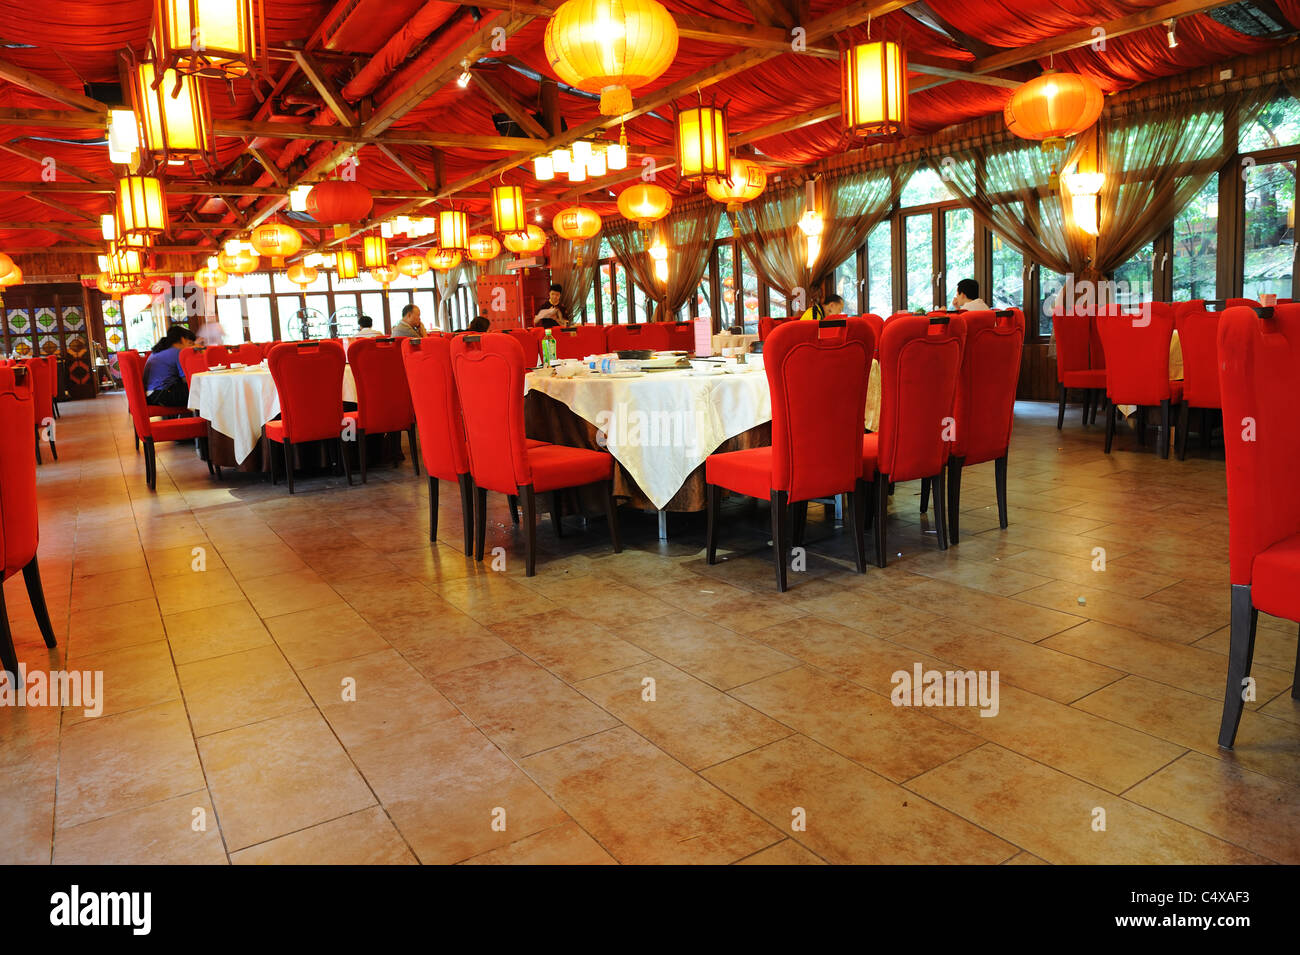 Interior of Chinese traditional style restaurant in Guangzhou, China Stock Photo